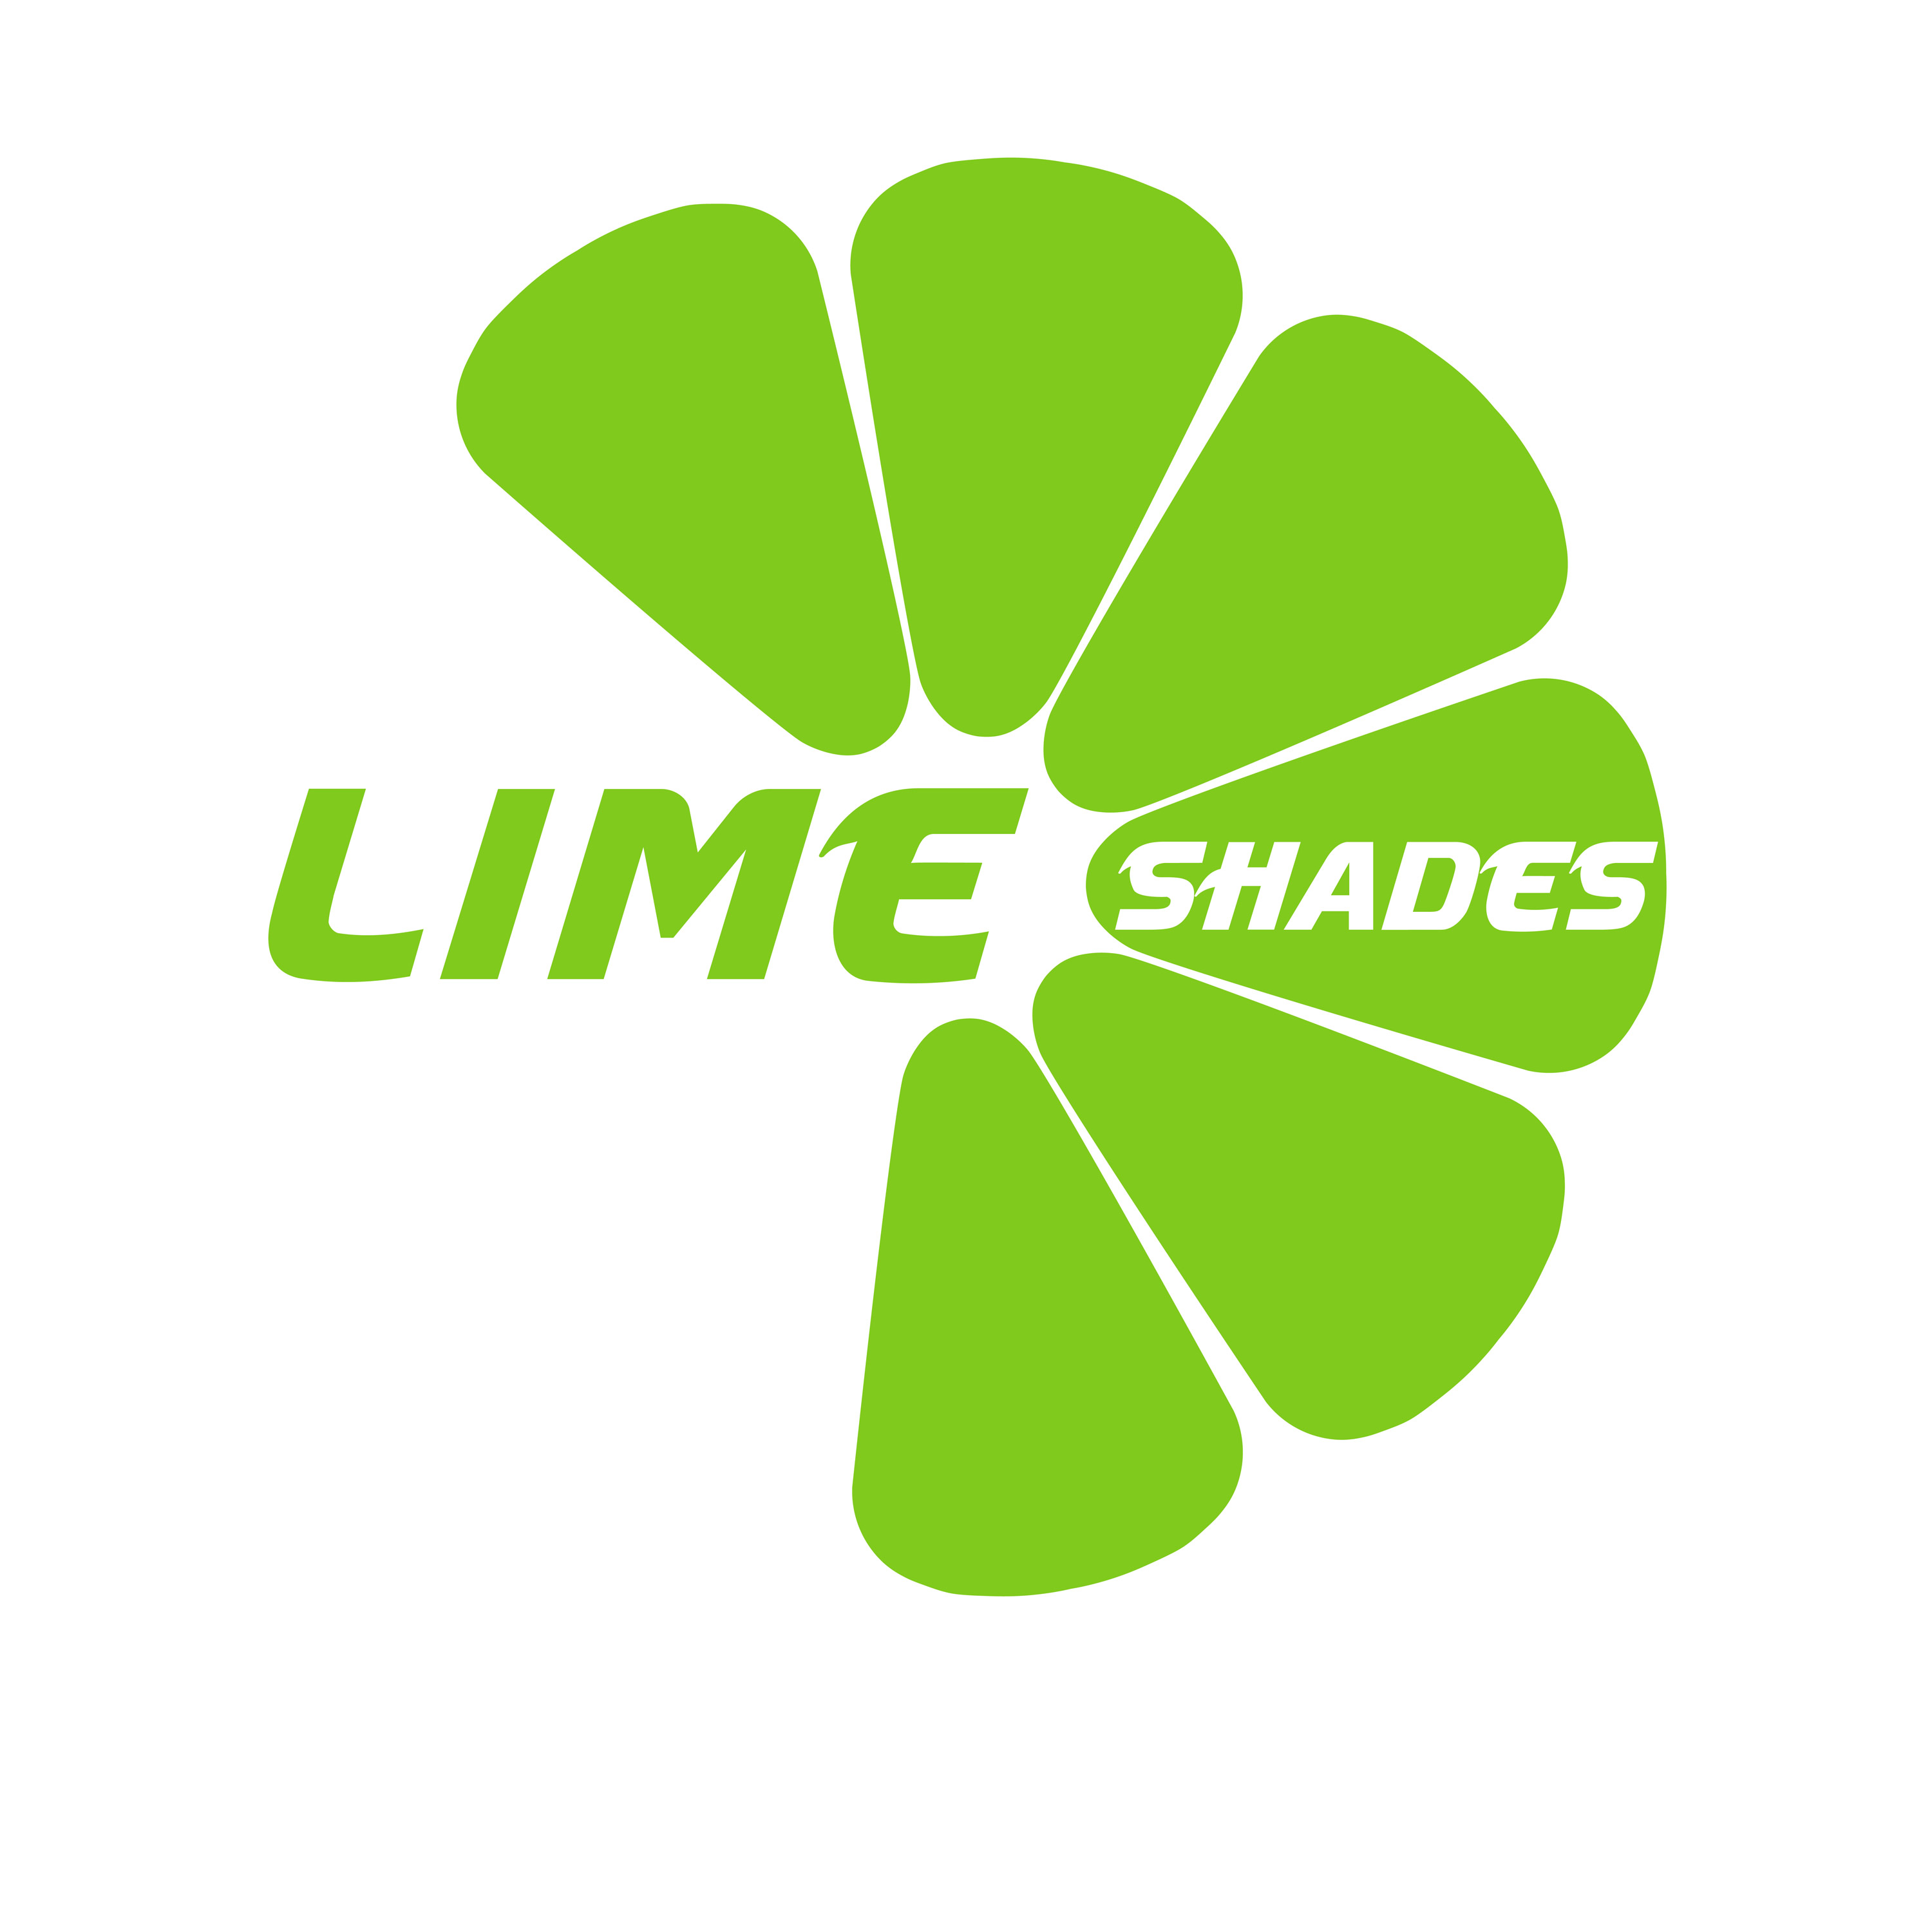 LIME SHADES